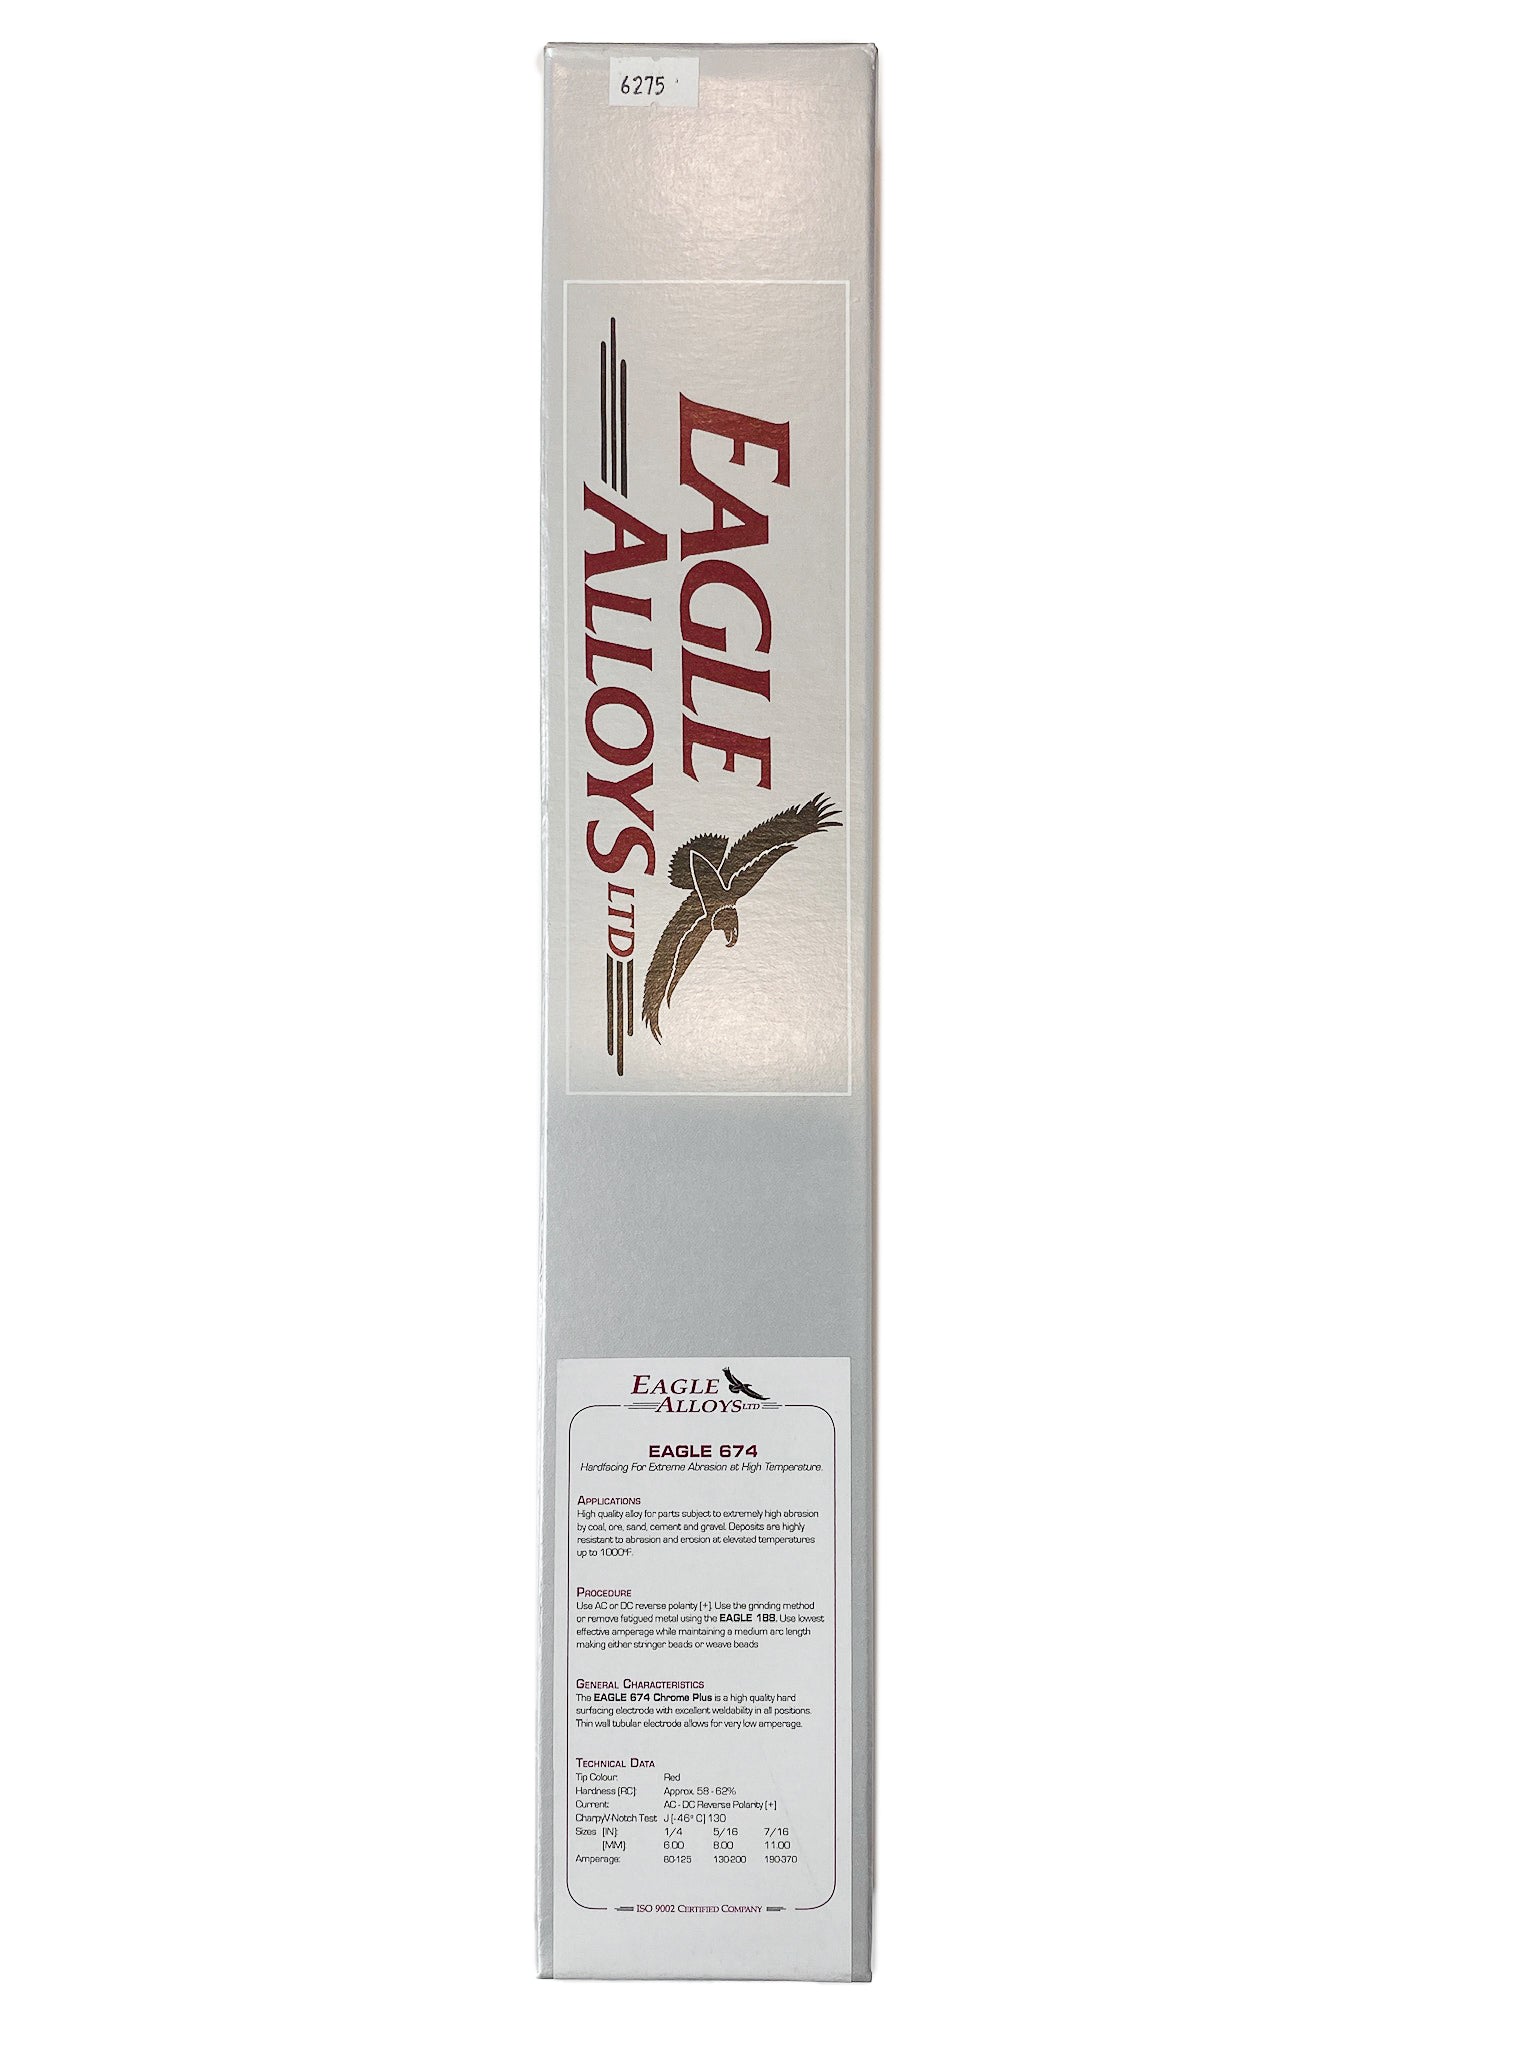 EAGLE 674 Hadfacing For Extreme Abrasion At High Temperature